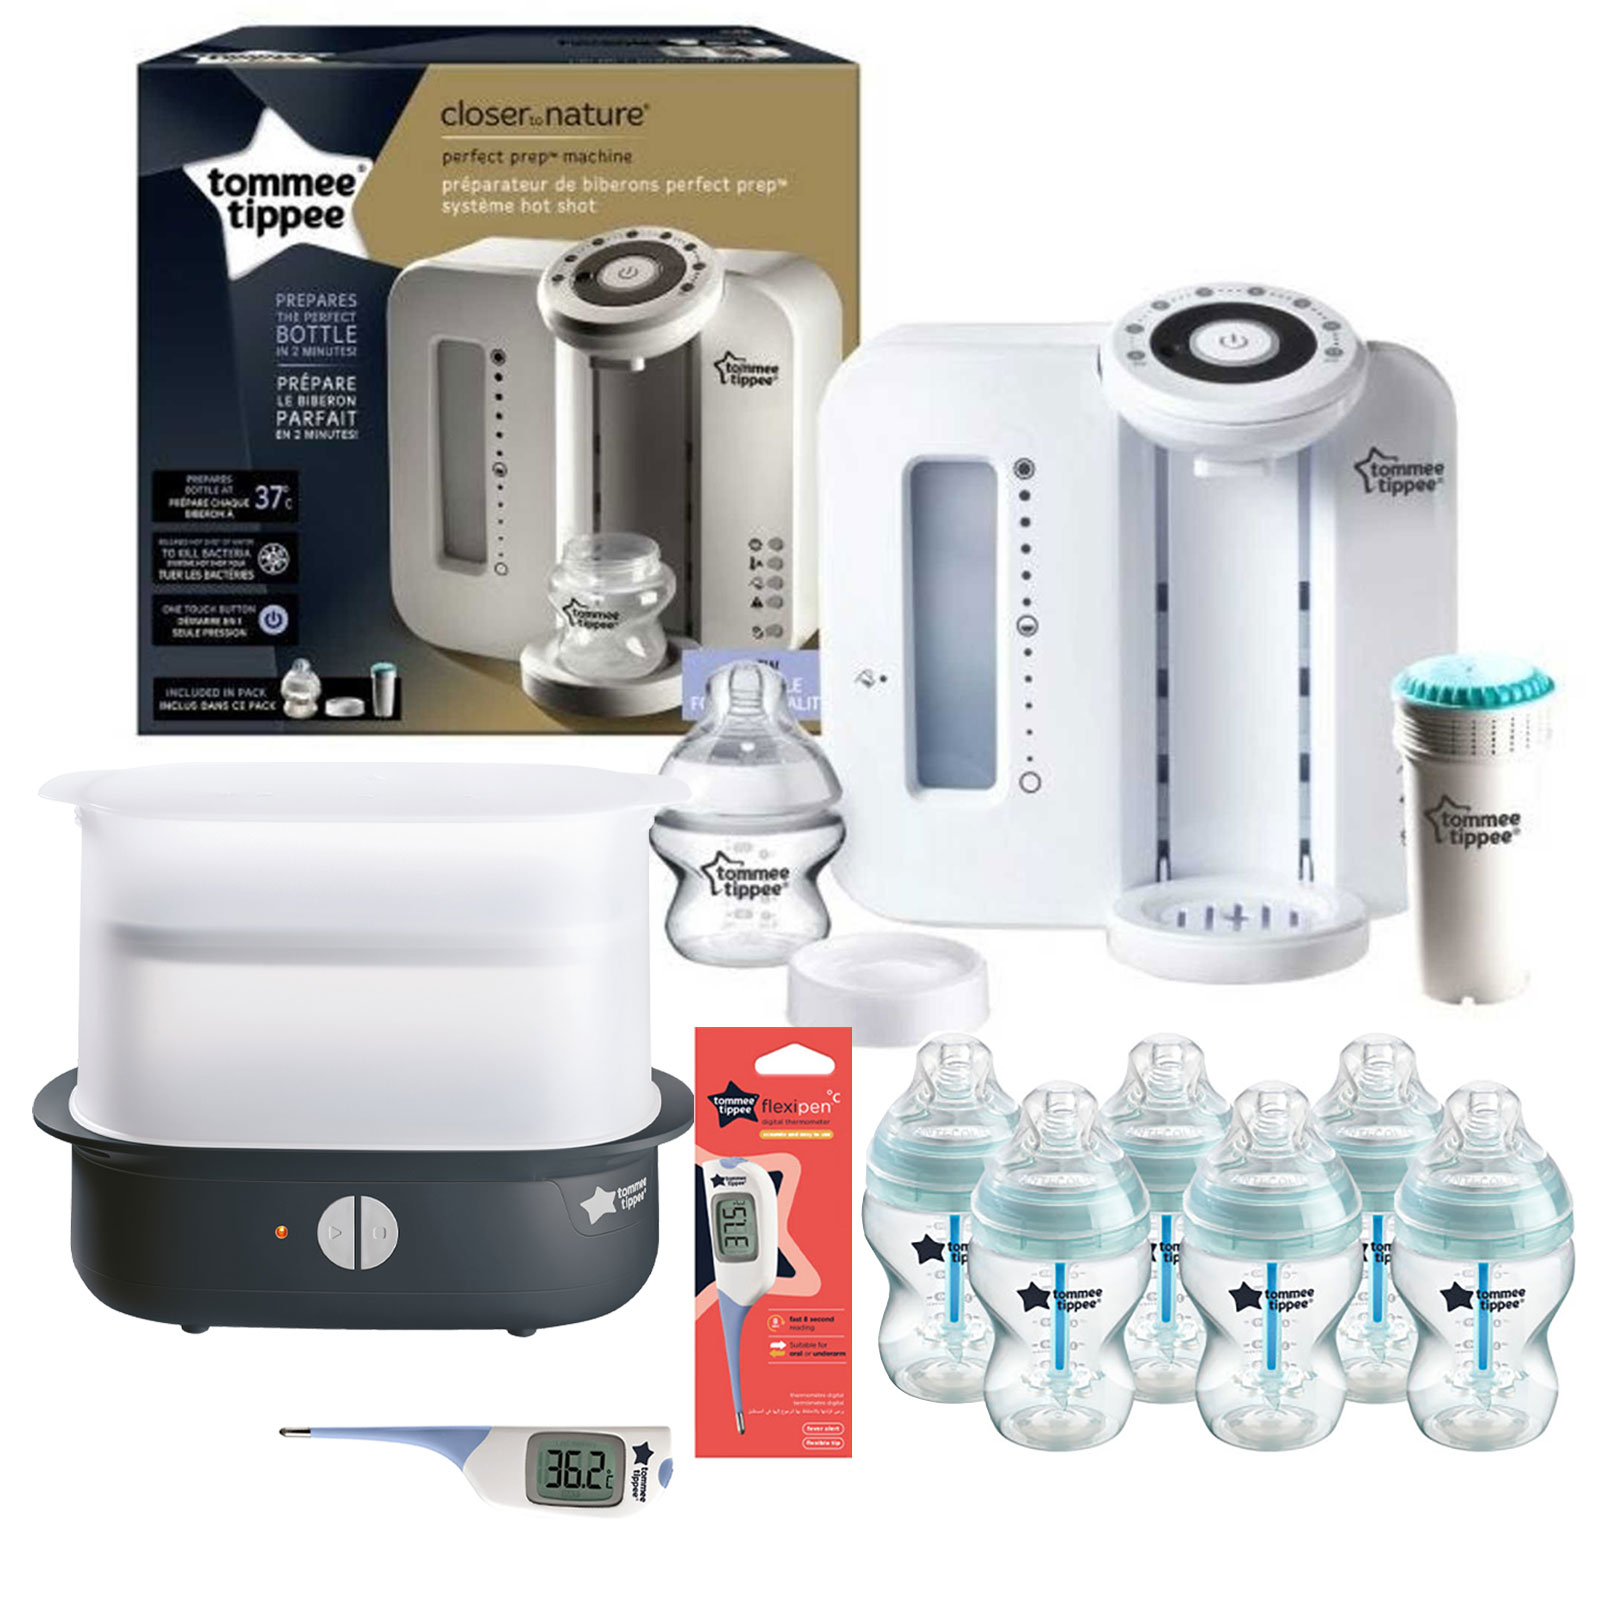 Tommee Tippee 10pc Perfect Prep Machine Electric Steriliser Anti-Colic Baby Bottle and Thermometer Feeding Bundle - White / Blue